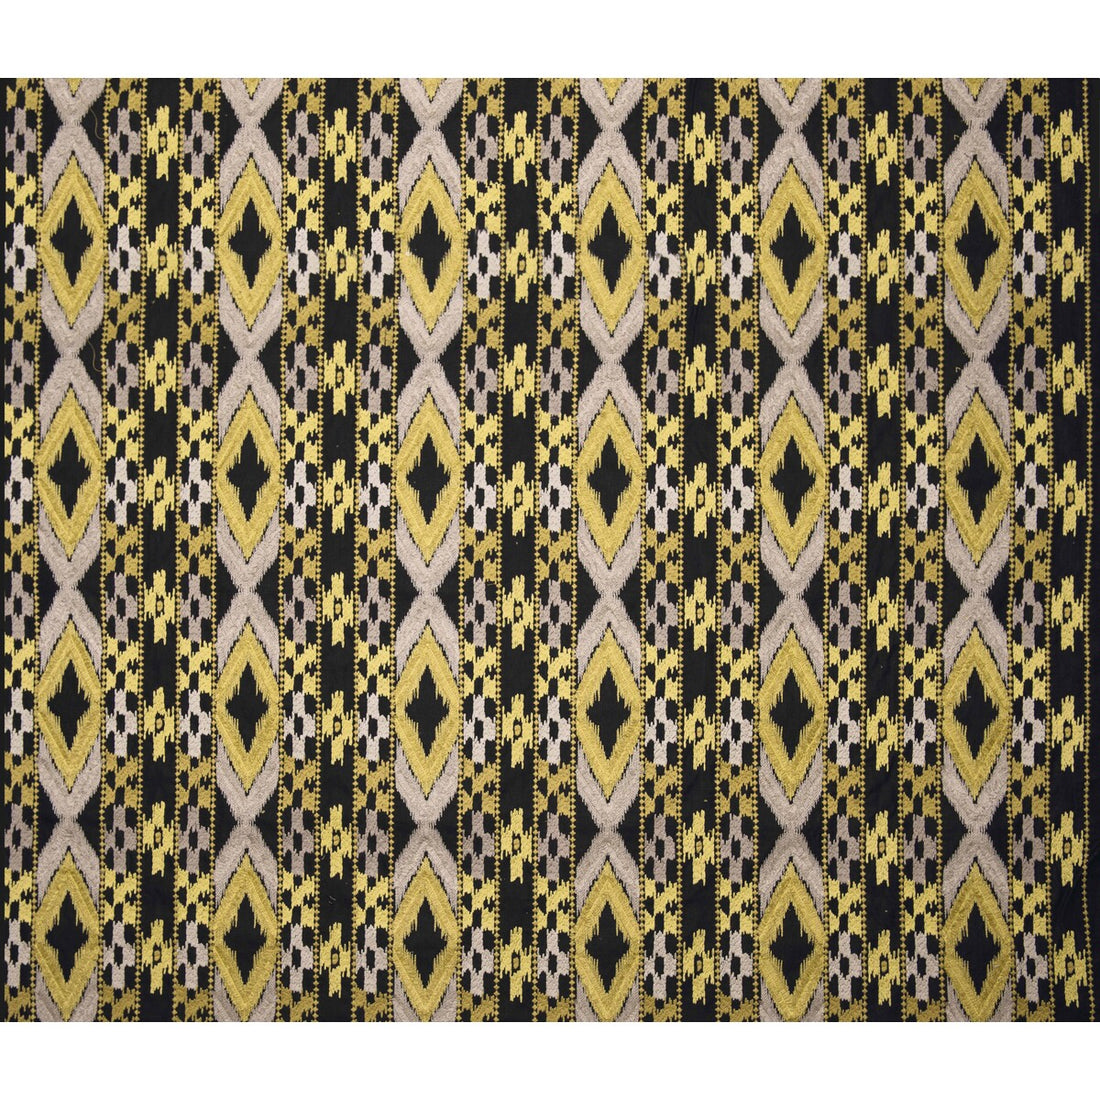 Queen fabric in blk/amarillo color - pattern GDT5403.4.0 - by Gaston y Daniela in the Gaston Africalia collection